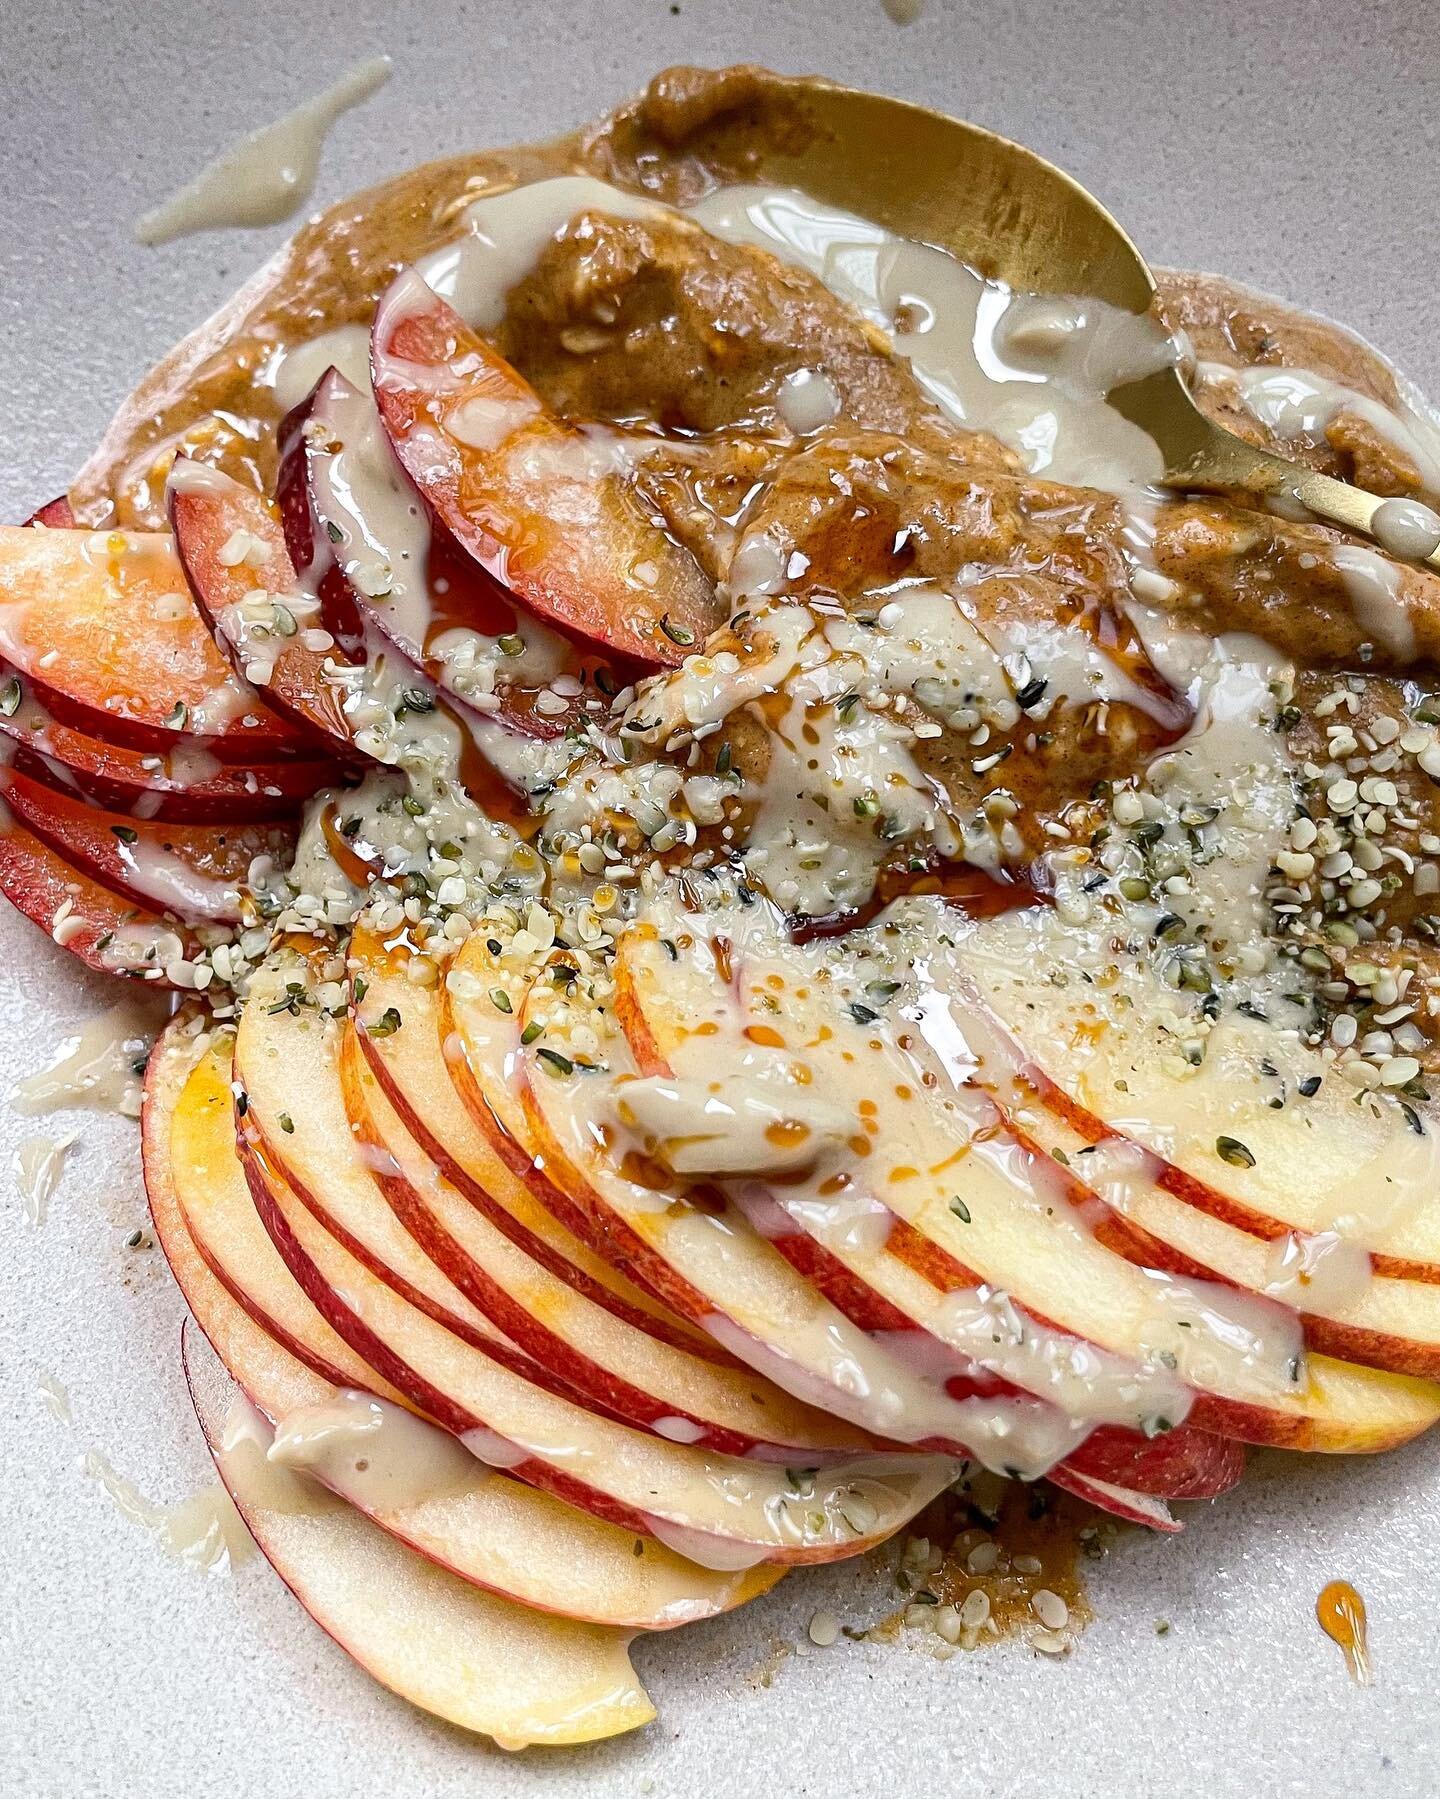 more warm and cozy oats from earlier today! @hungryroot gala apple and cinnamon oatmeal with plums, @runamokmaple maple syrup, hemp seeds, and tahini

code 30MADDIE for $$ off 😘